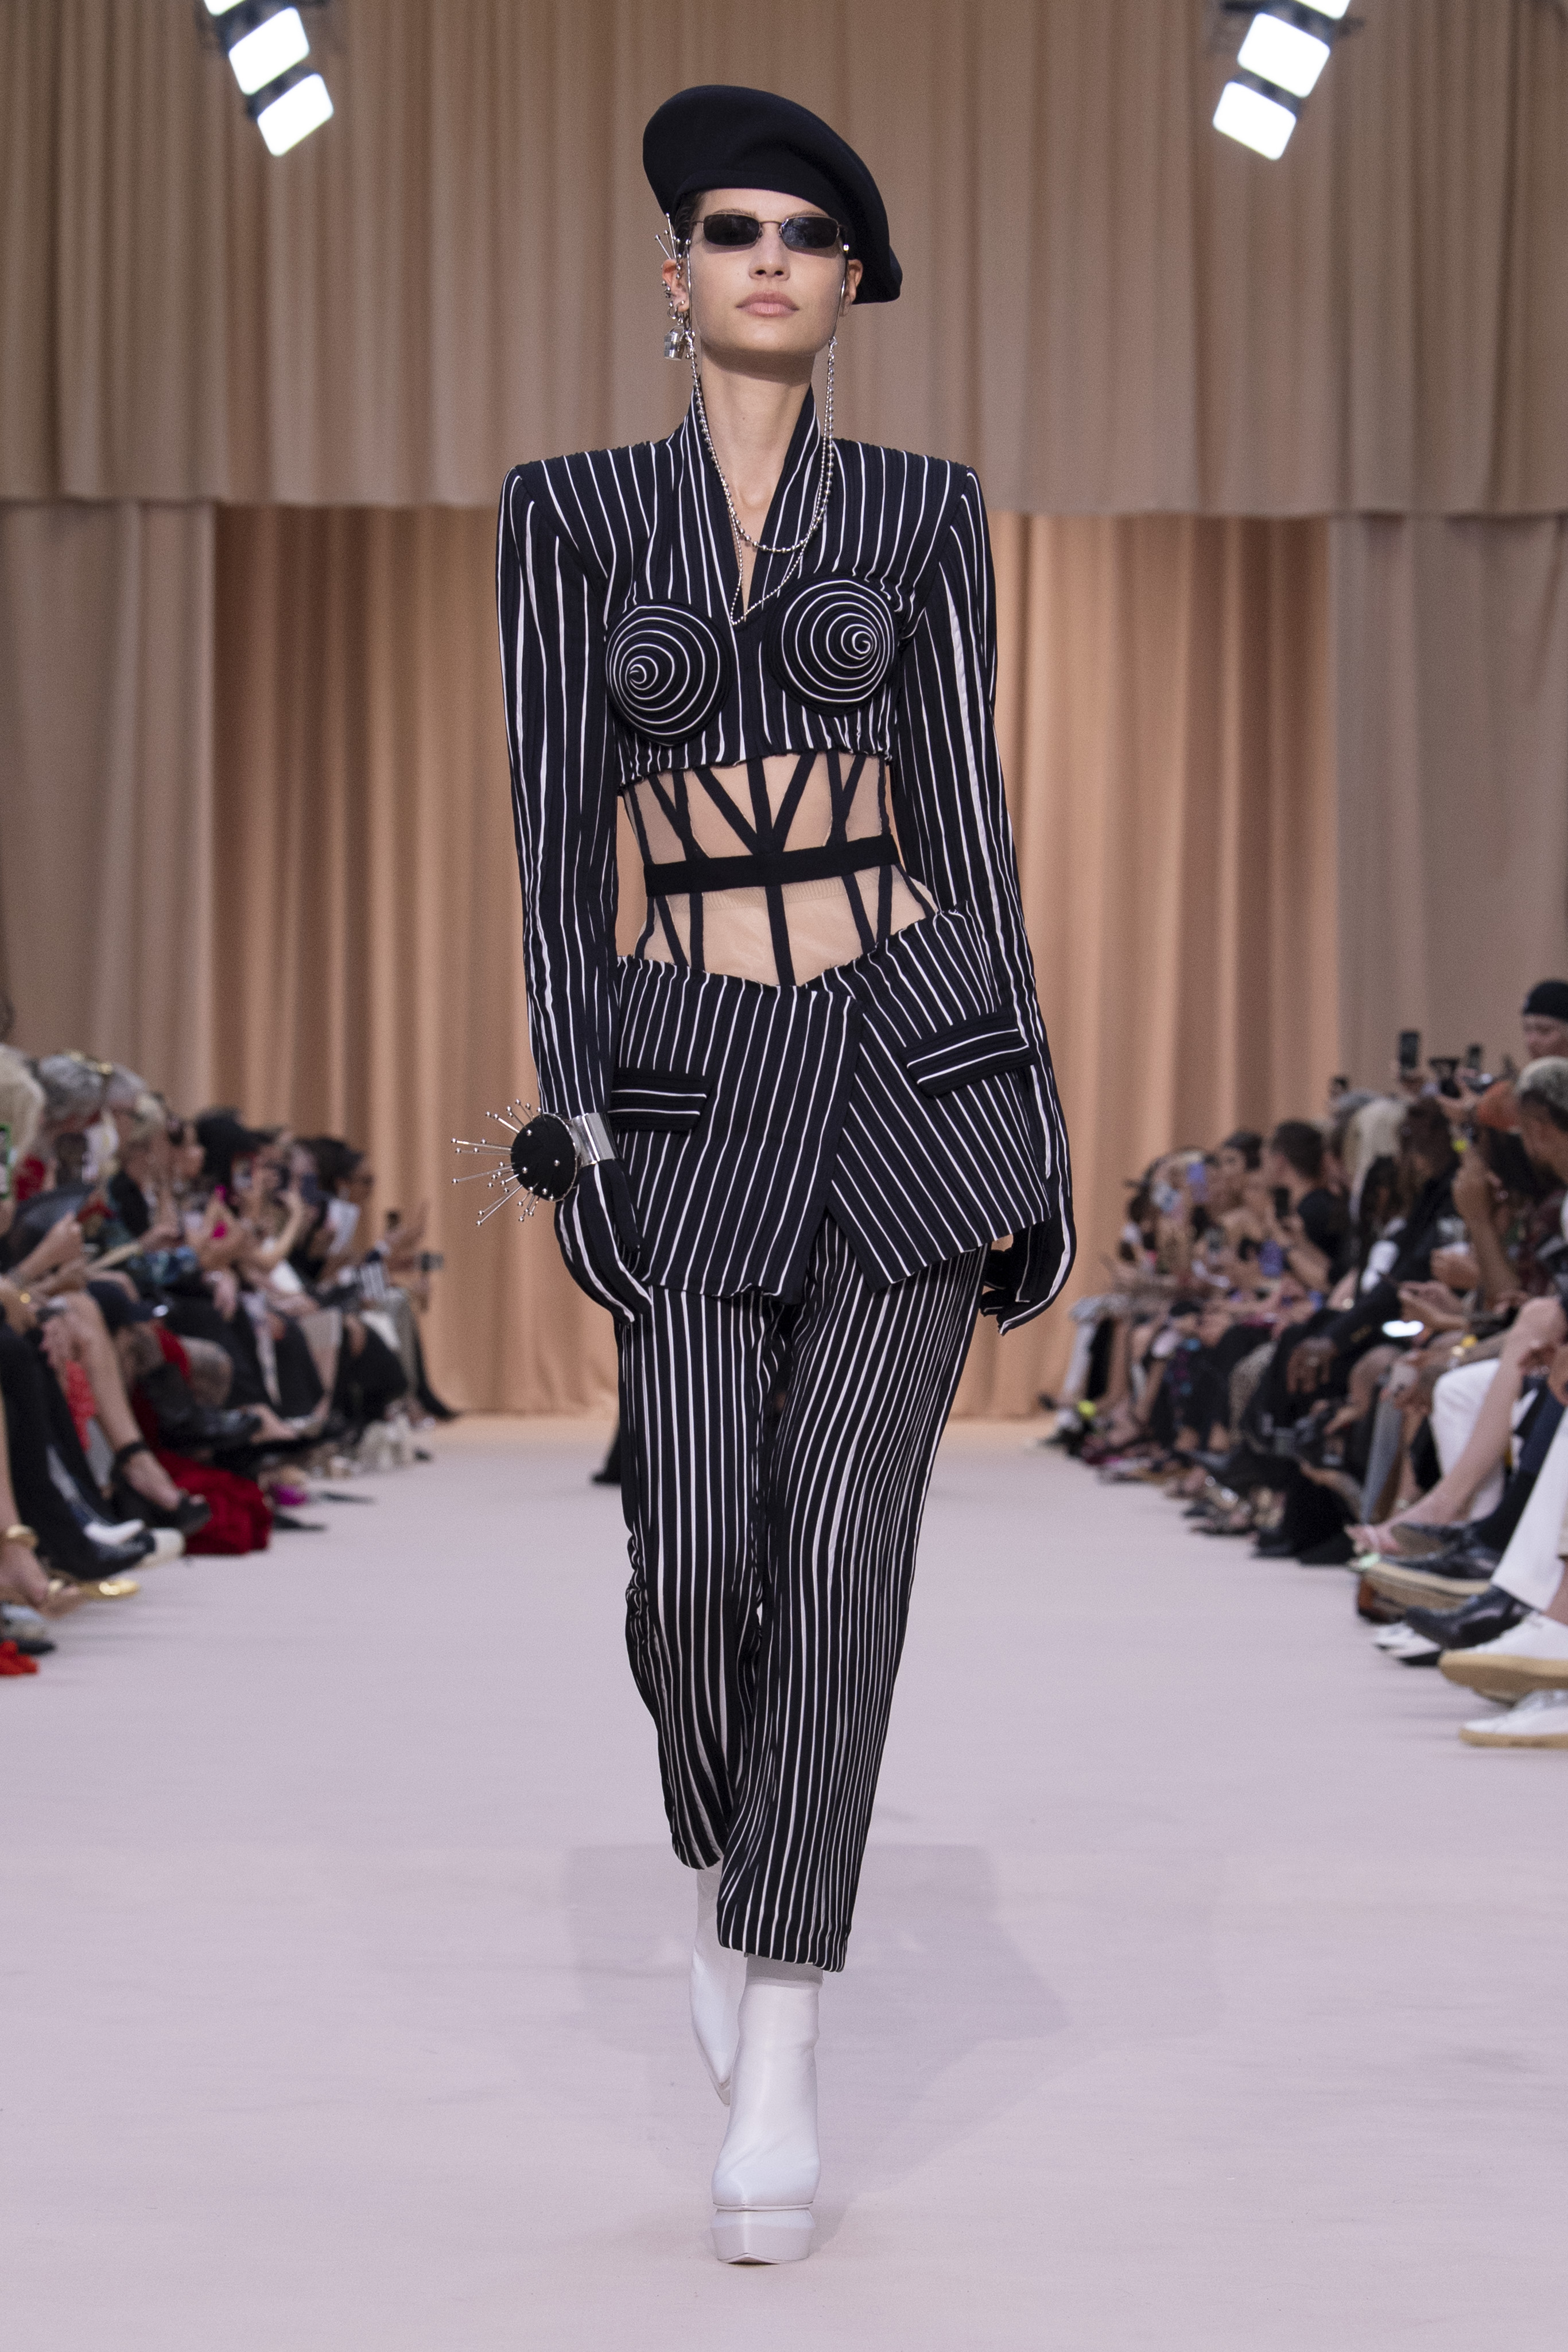 Olivier Rousteing Sketched 200 Looks for Jean Paul Gaultier Couture – WWD